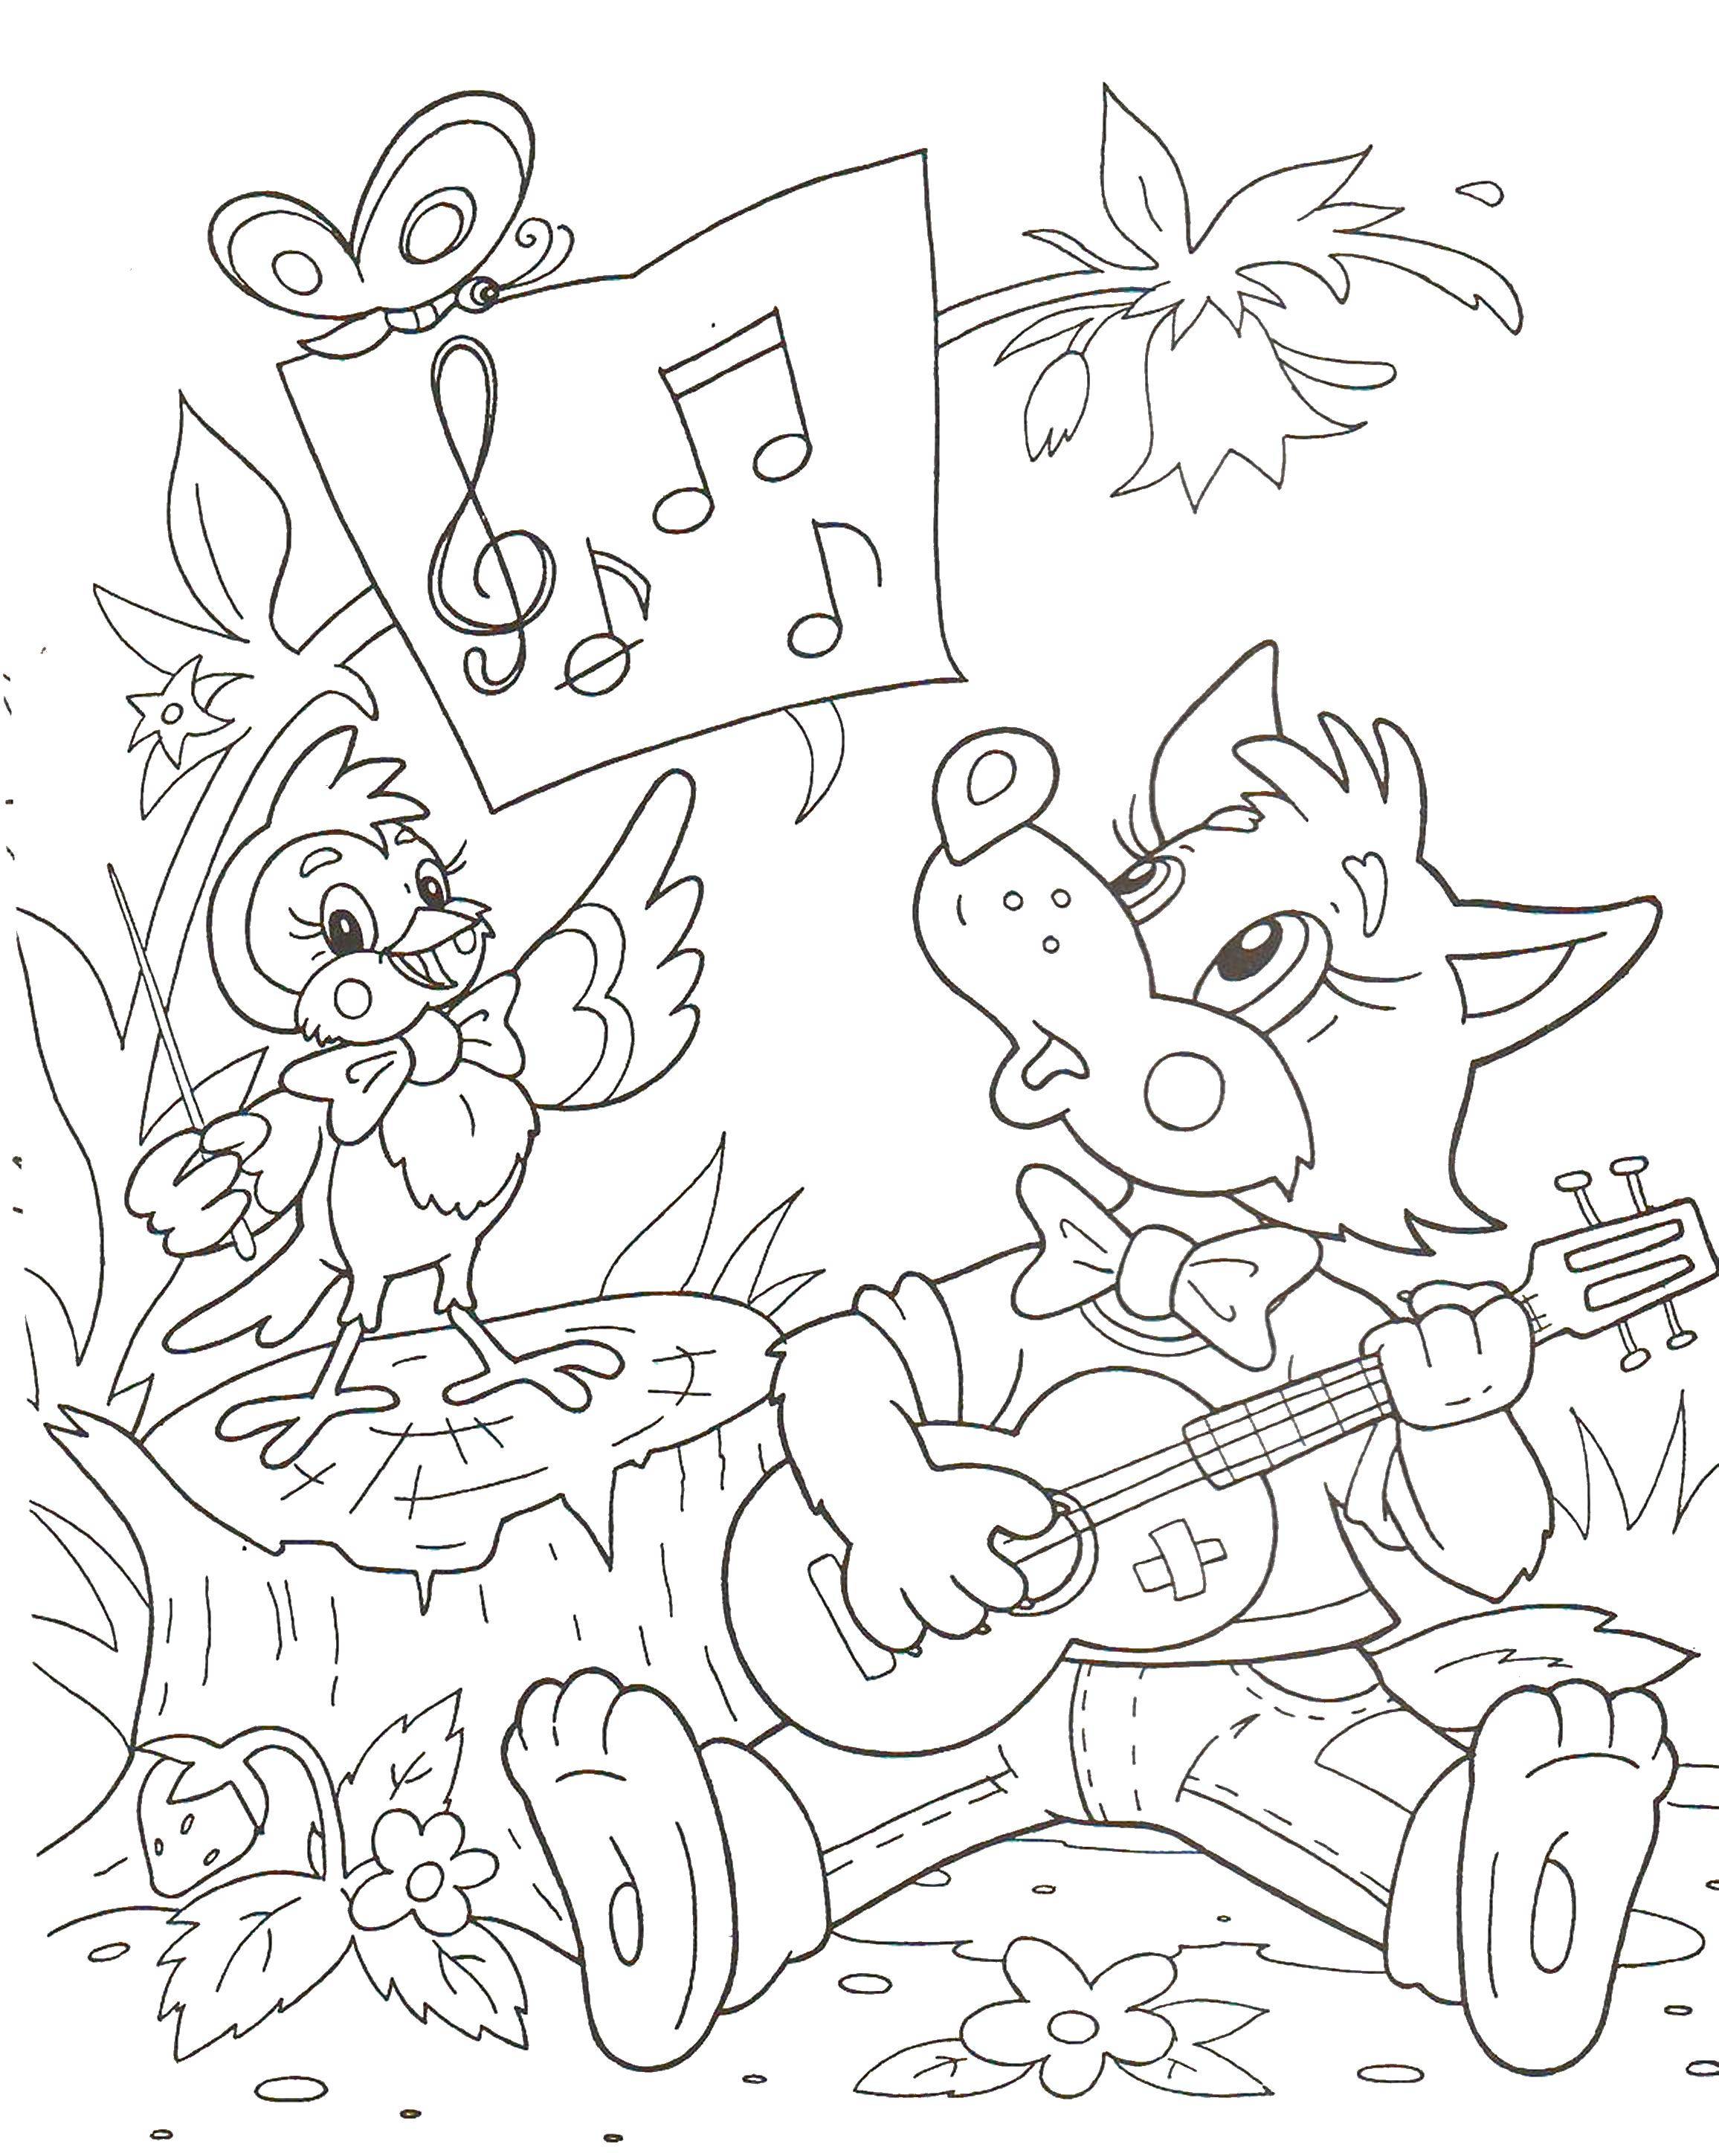 Coloring Wolf plays the guitar. Category Fairy tales. Tags:  wolf, guitar.